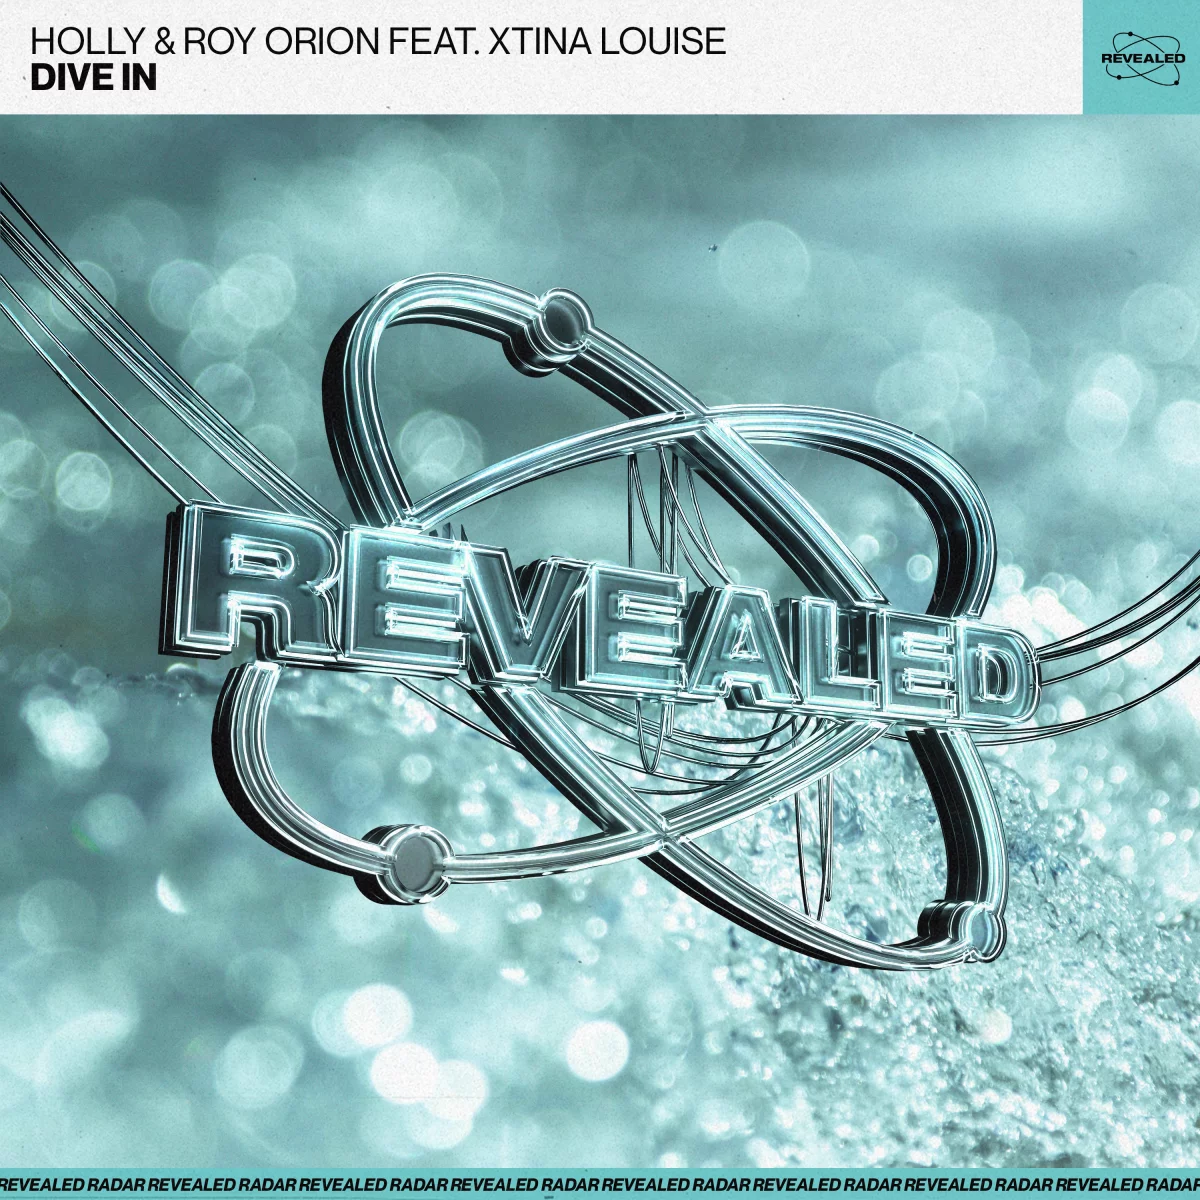 Dive In - Holly⁠ & Roy Orion⁠ feat. Xtina Louise⁠ 